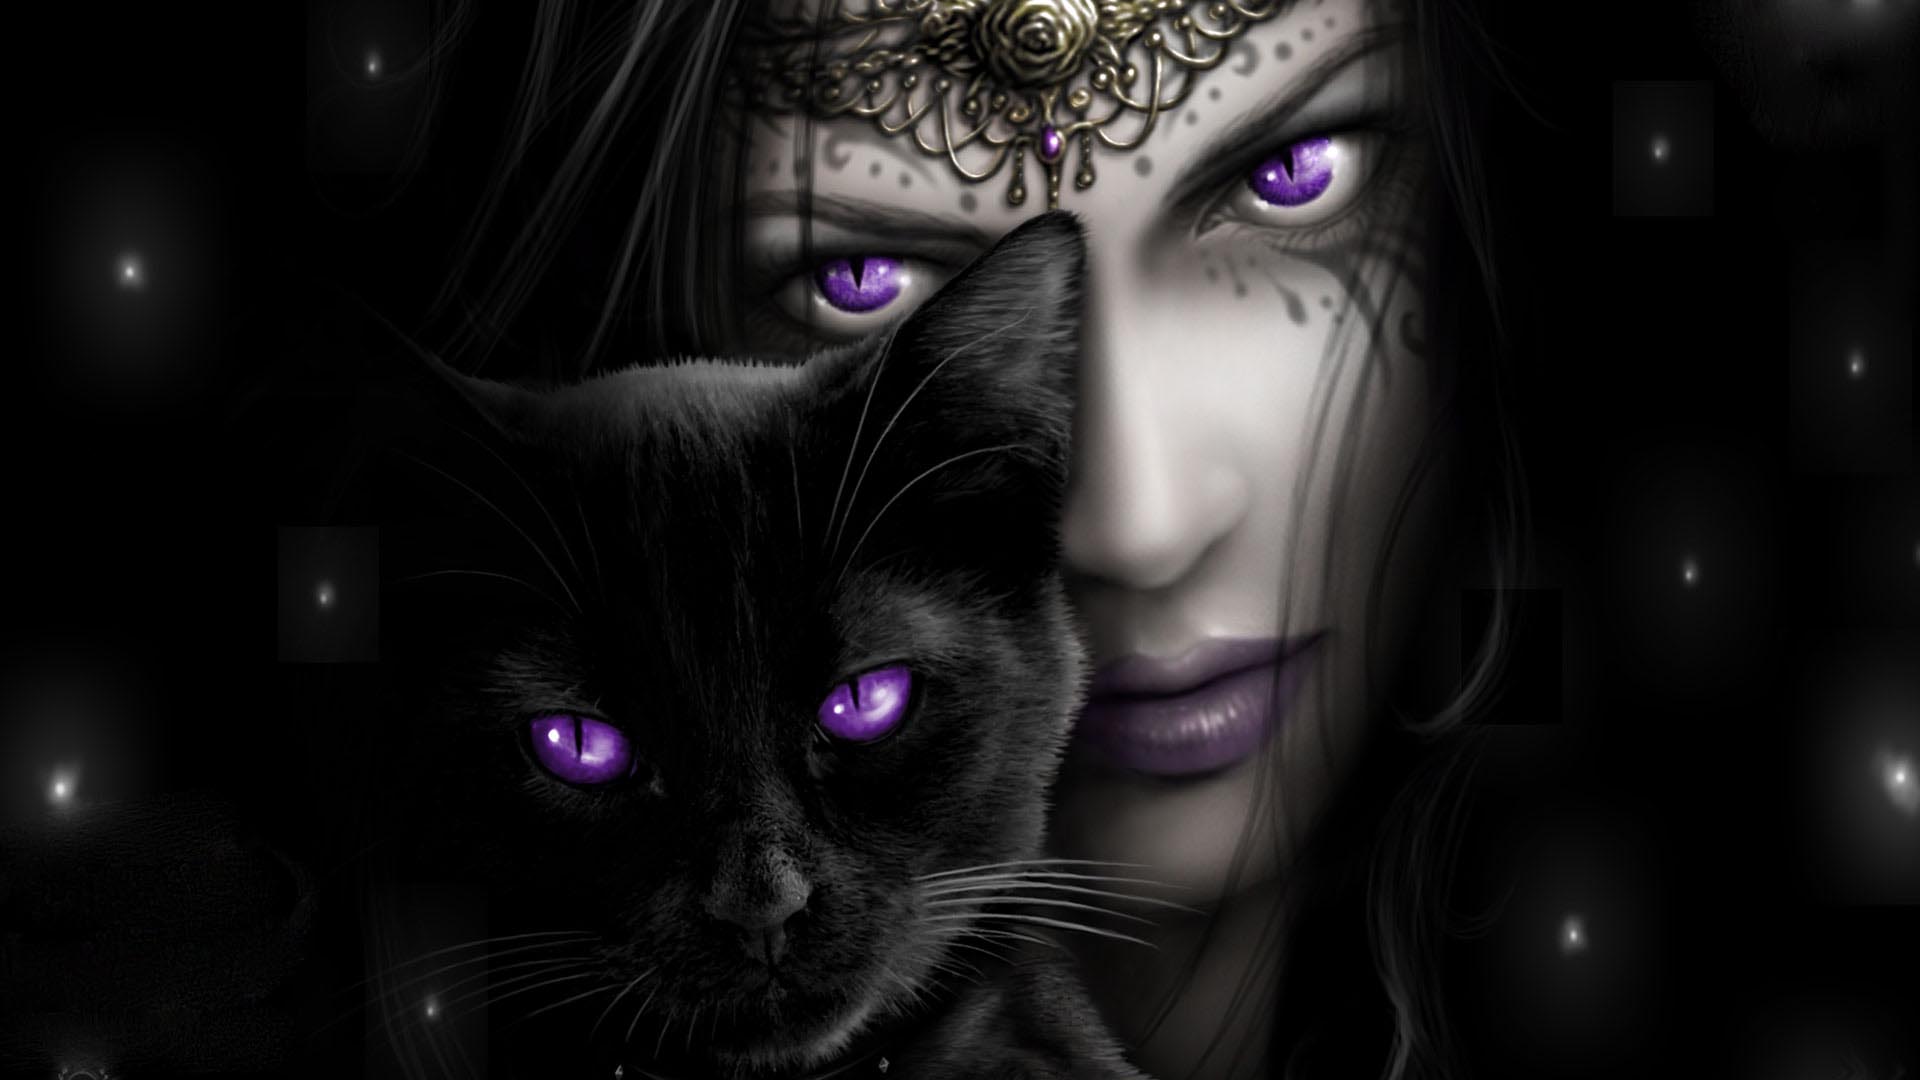 wiccan woman purple eyes cat babe witch women and 105880 1920x1080